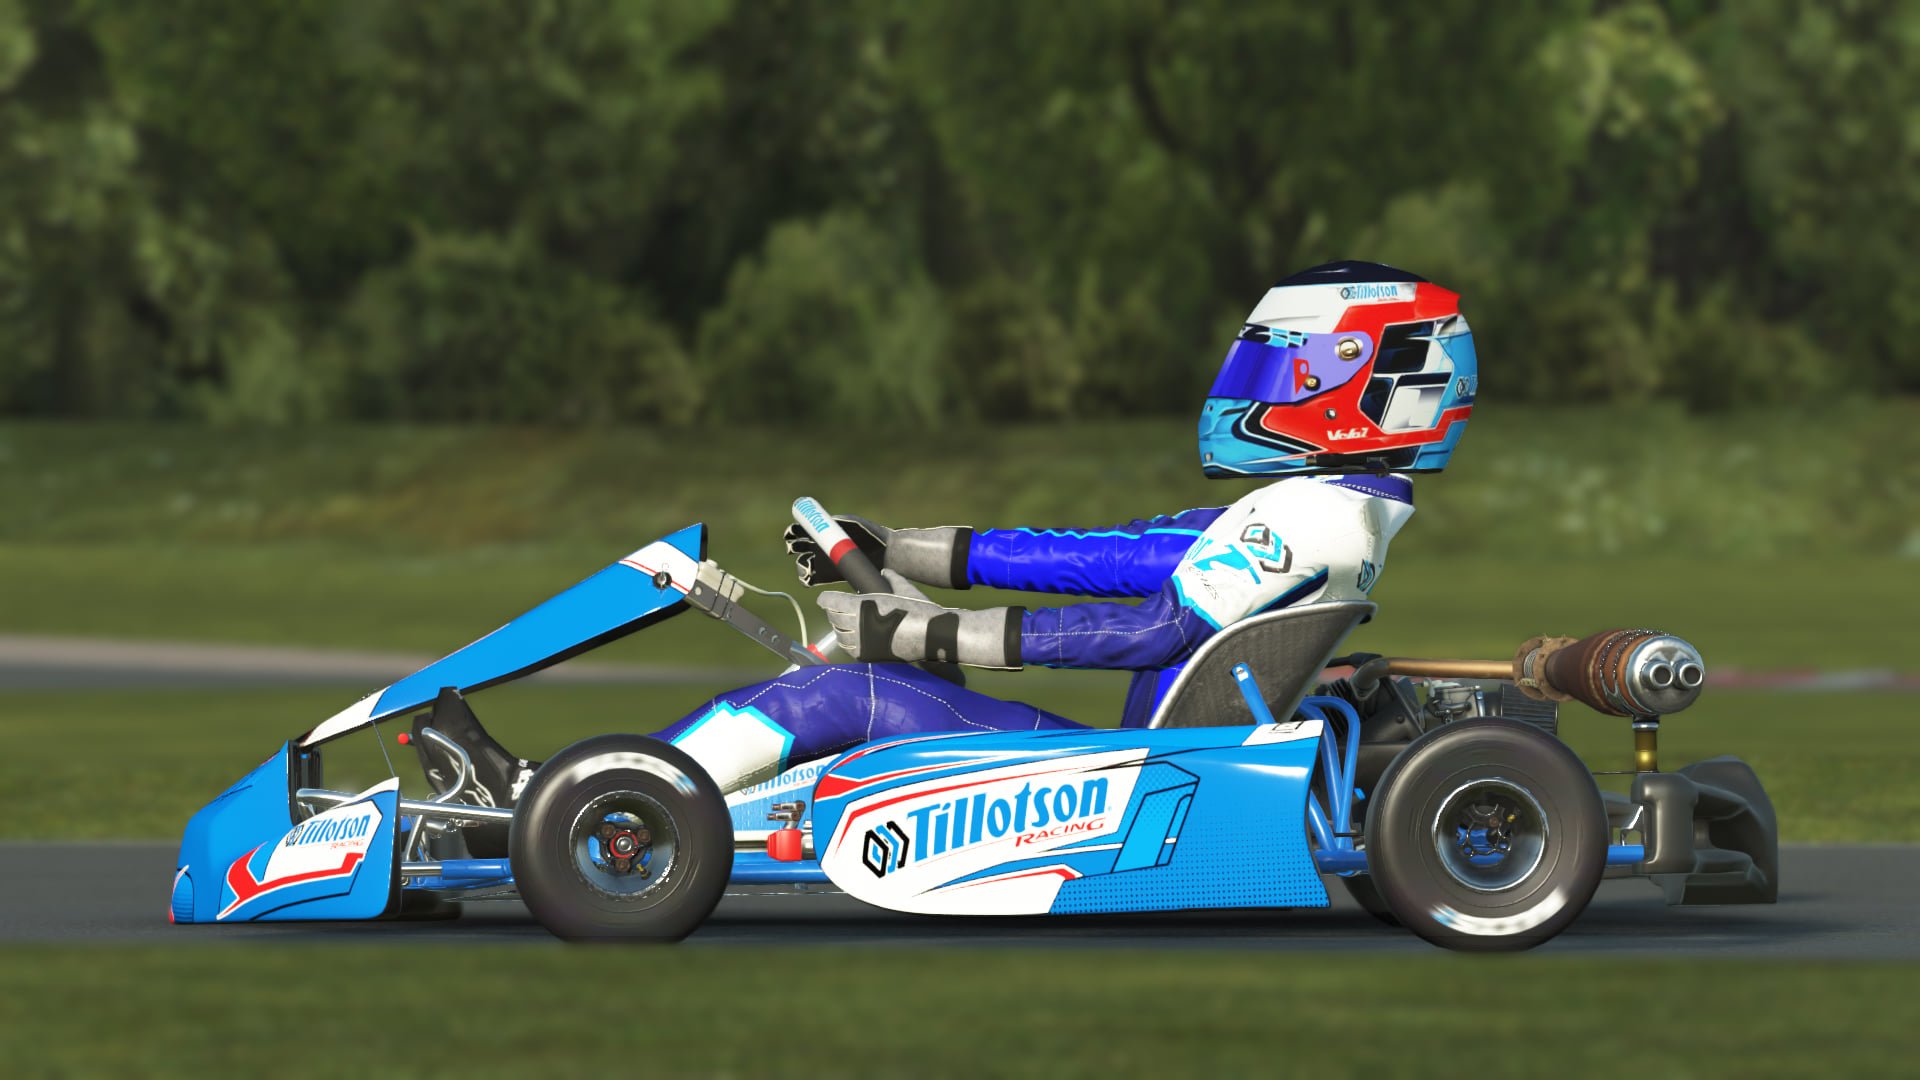 More information about "KartSim Tillotson T4 Series disponibile in rFactor 2"